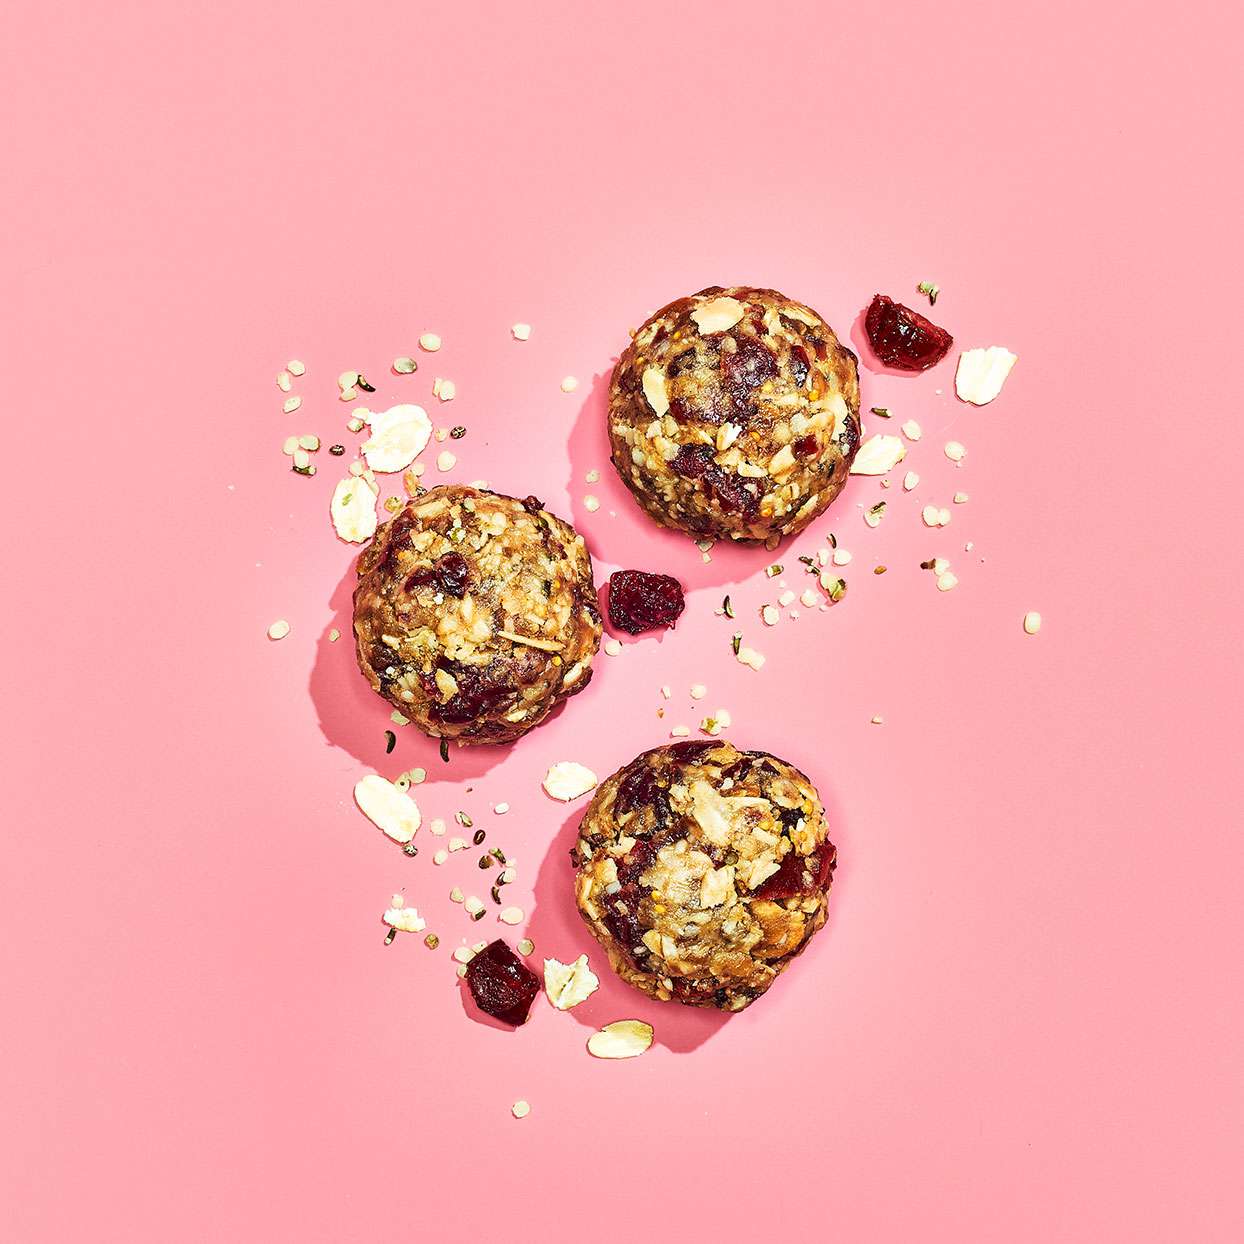 <p>Craisins and dried figs do double duty as sweeteners and binders to make these easy energy balls both tasty and practical. These portable snacks mix in sunflower butter for plenty of protein. They're ready in just 25 minutes and can be stored in your freezer for easy snacking.</p>
                          